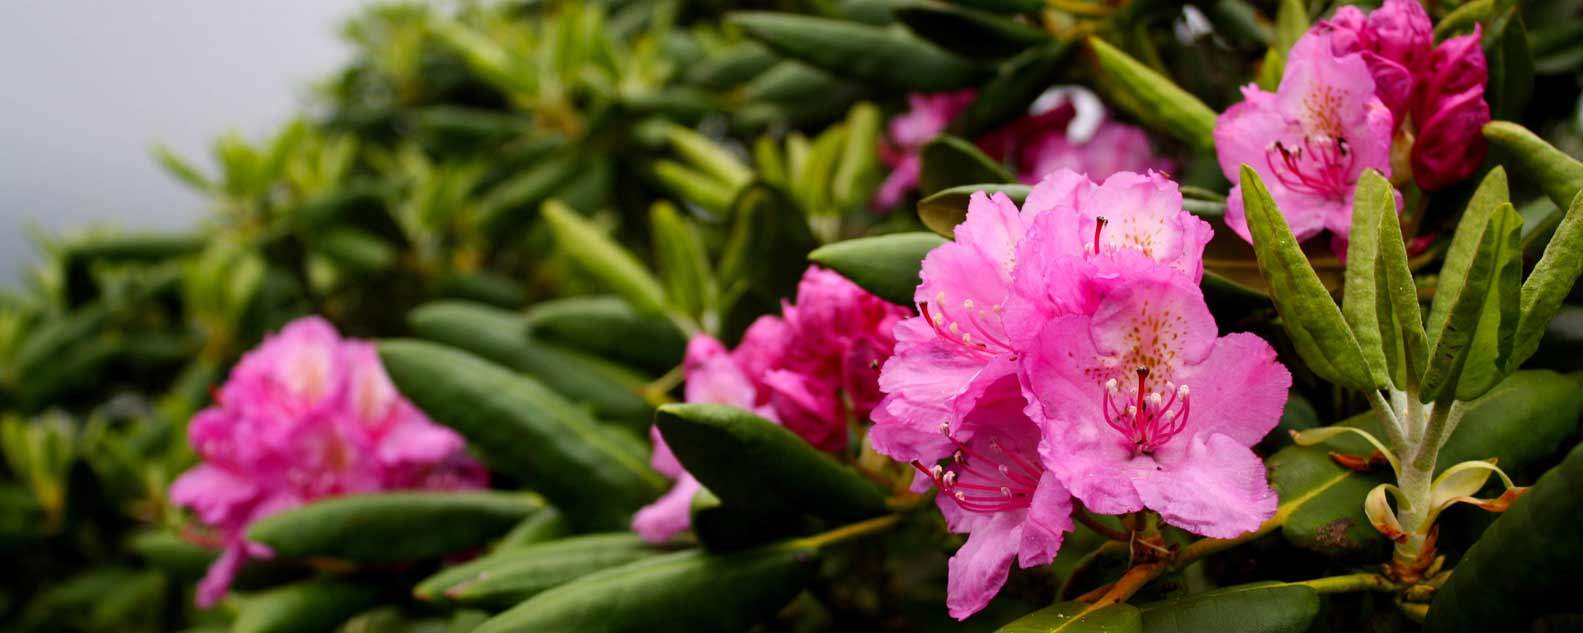 Play, Stay, and Get Away in May—Rhodies and Races, Food and Fun!